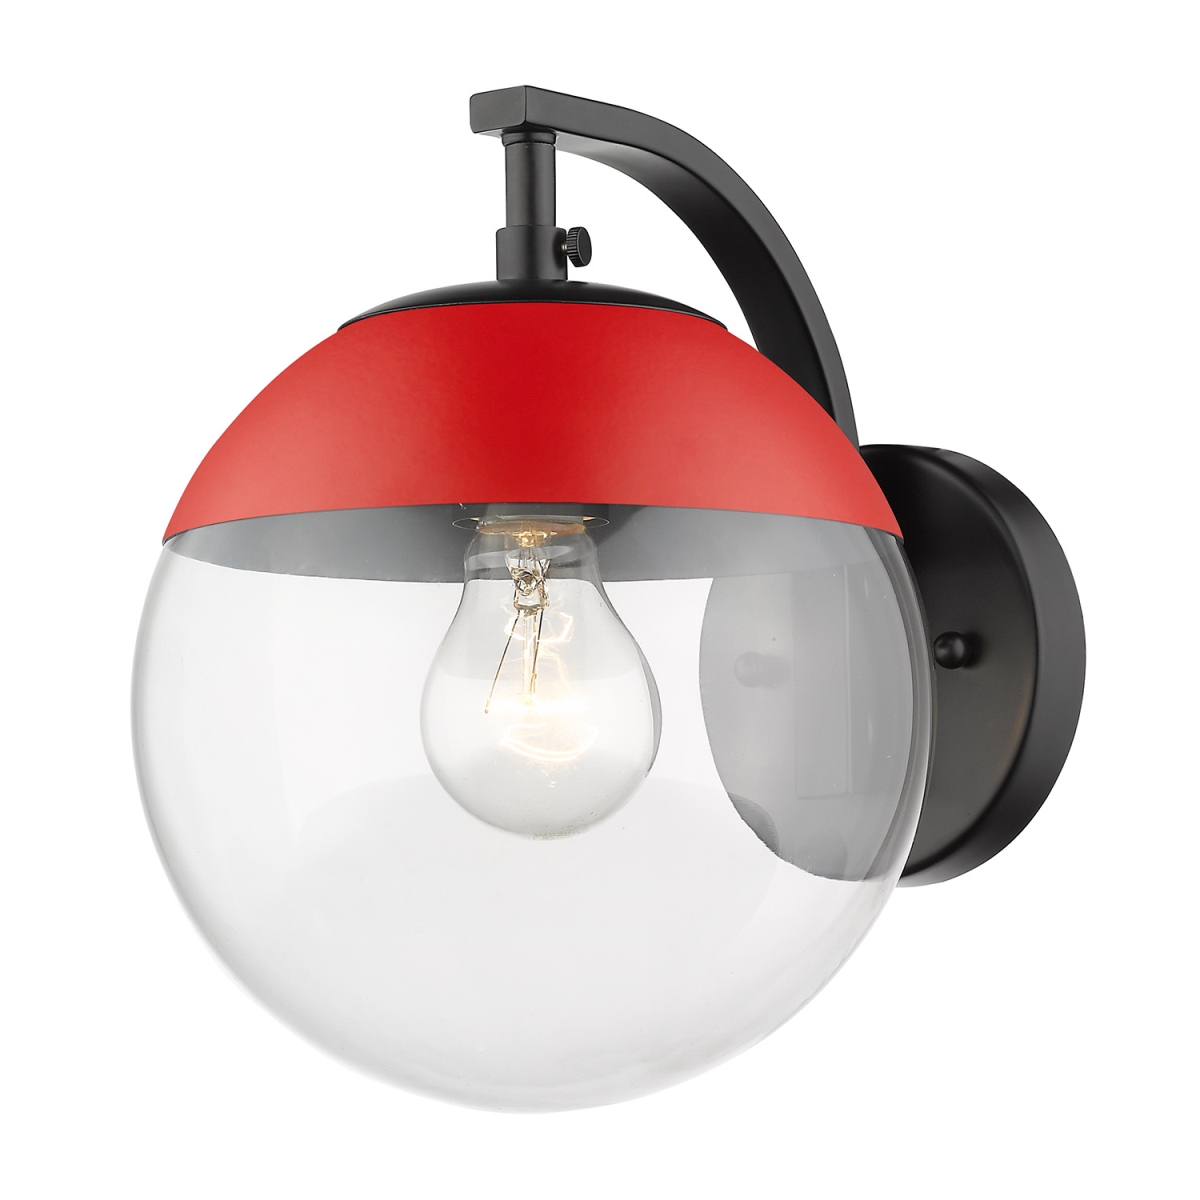 3219-1w Blk-red Dixon Sconce Light With Clear Glass & Red Cap, Black